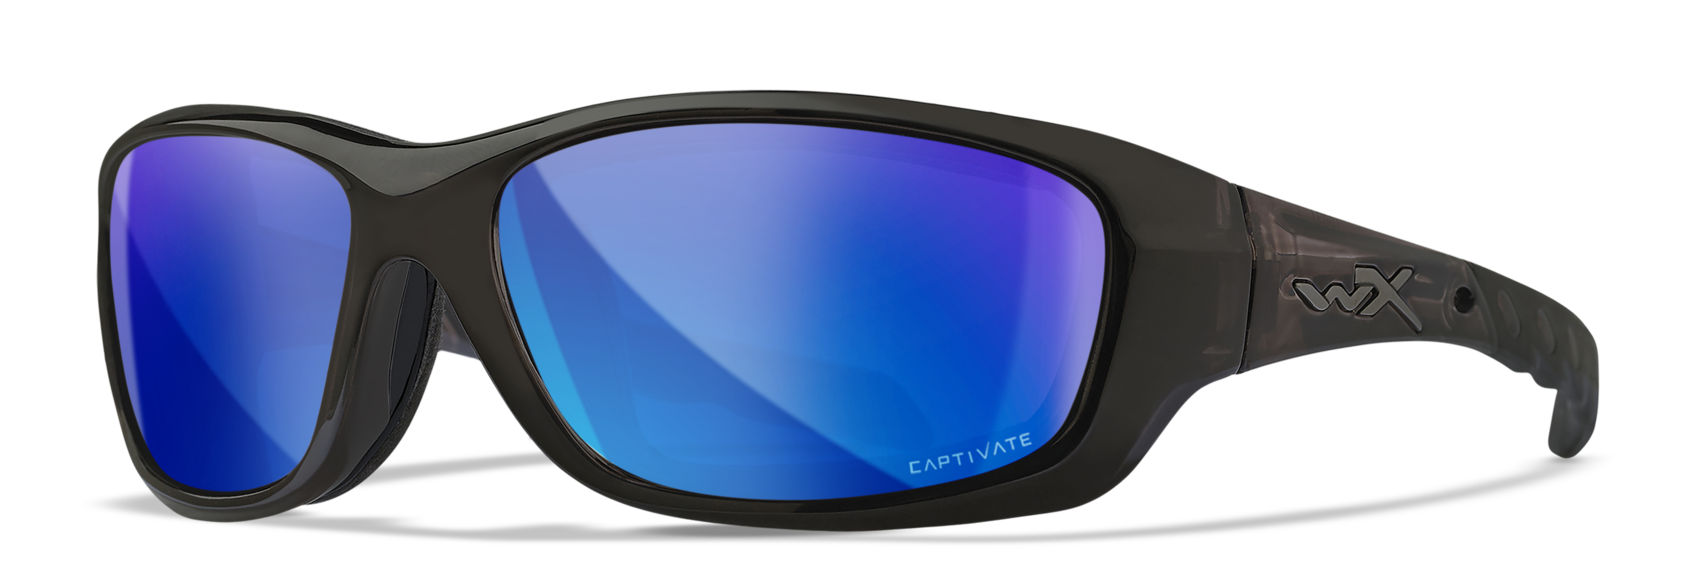 Wiley X WX GRAVITY Oval Sunglasses  Black Crystal 63-17-119